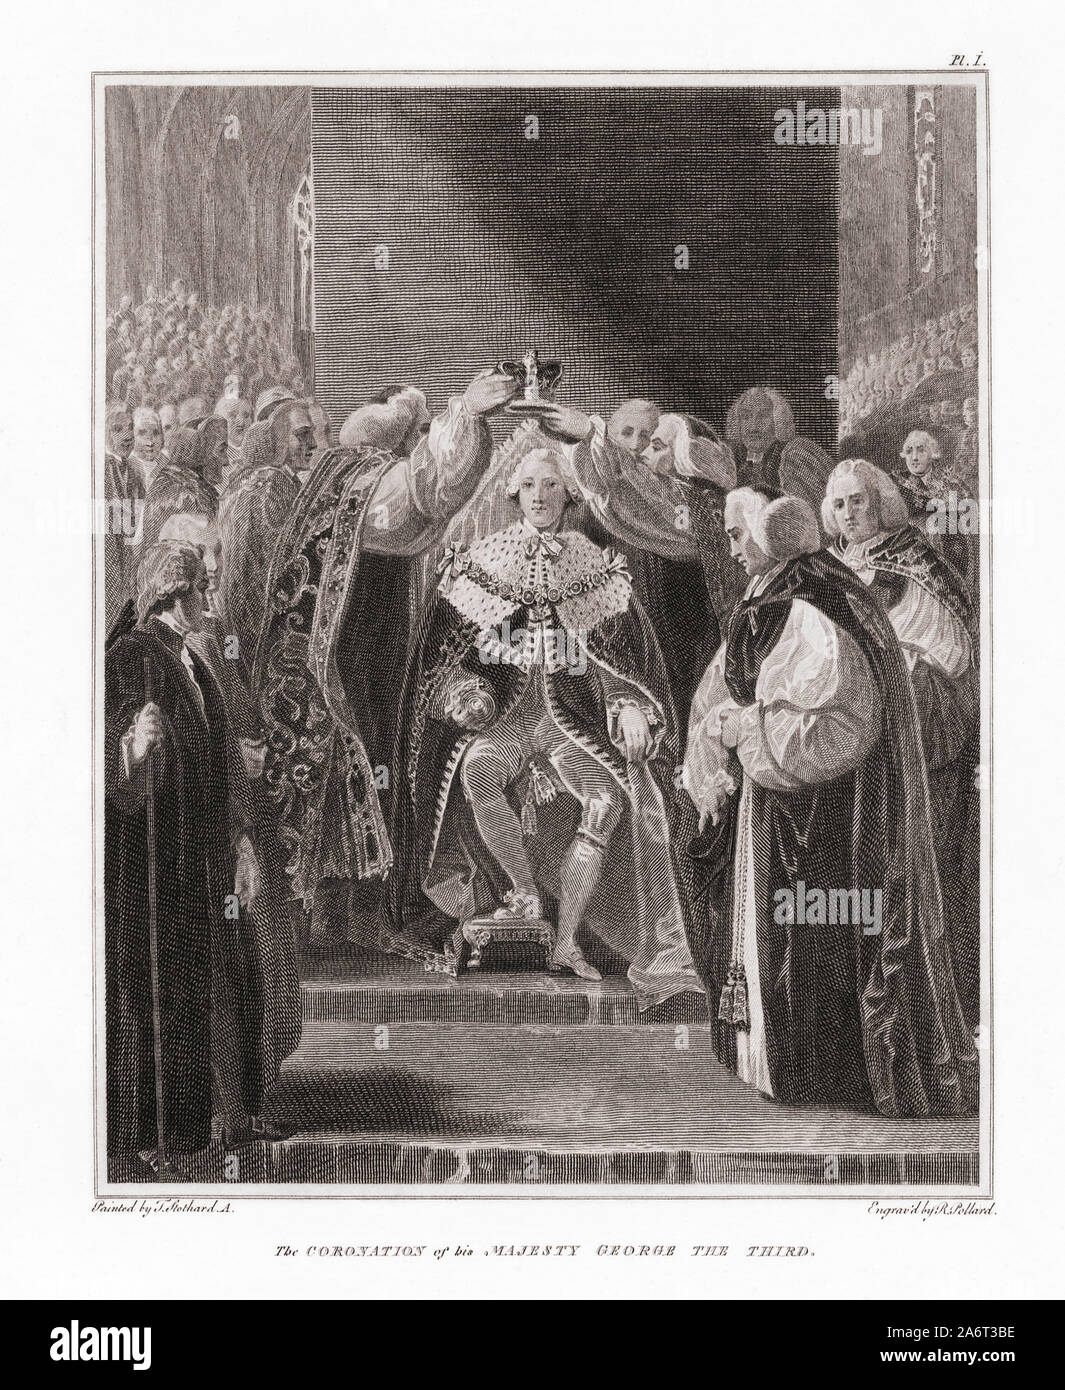 The Coronation of His Majesty George the Third.  After an early 19th century print.  George III, George William Frederick, 1738 - 1820.  Crowned King of Great Britain and of Ireland September 22, 1761. Stock Photo